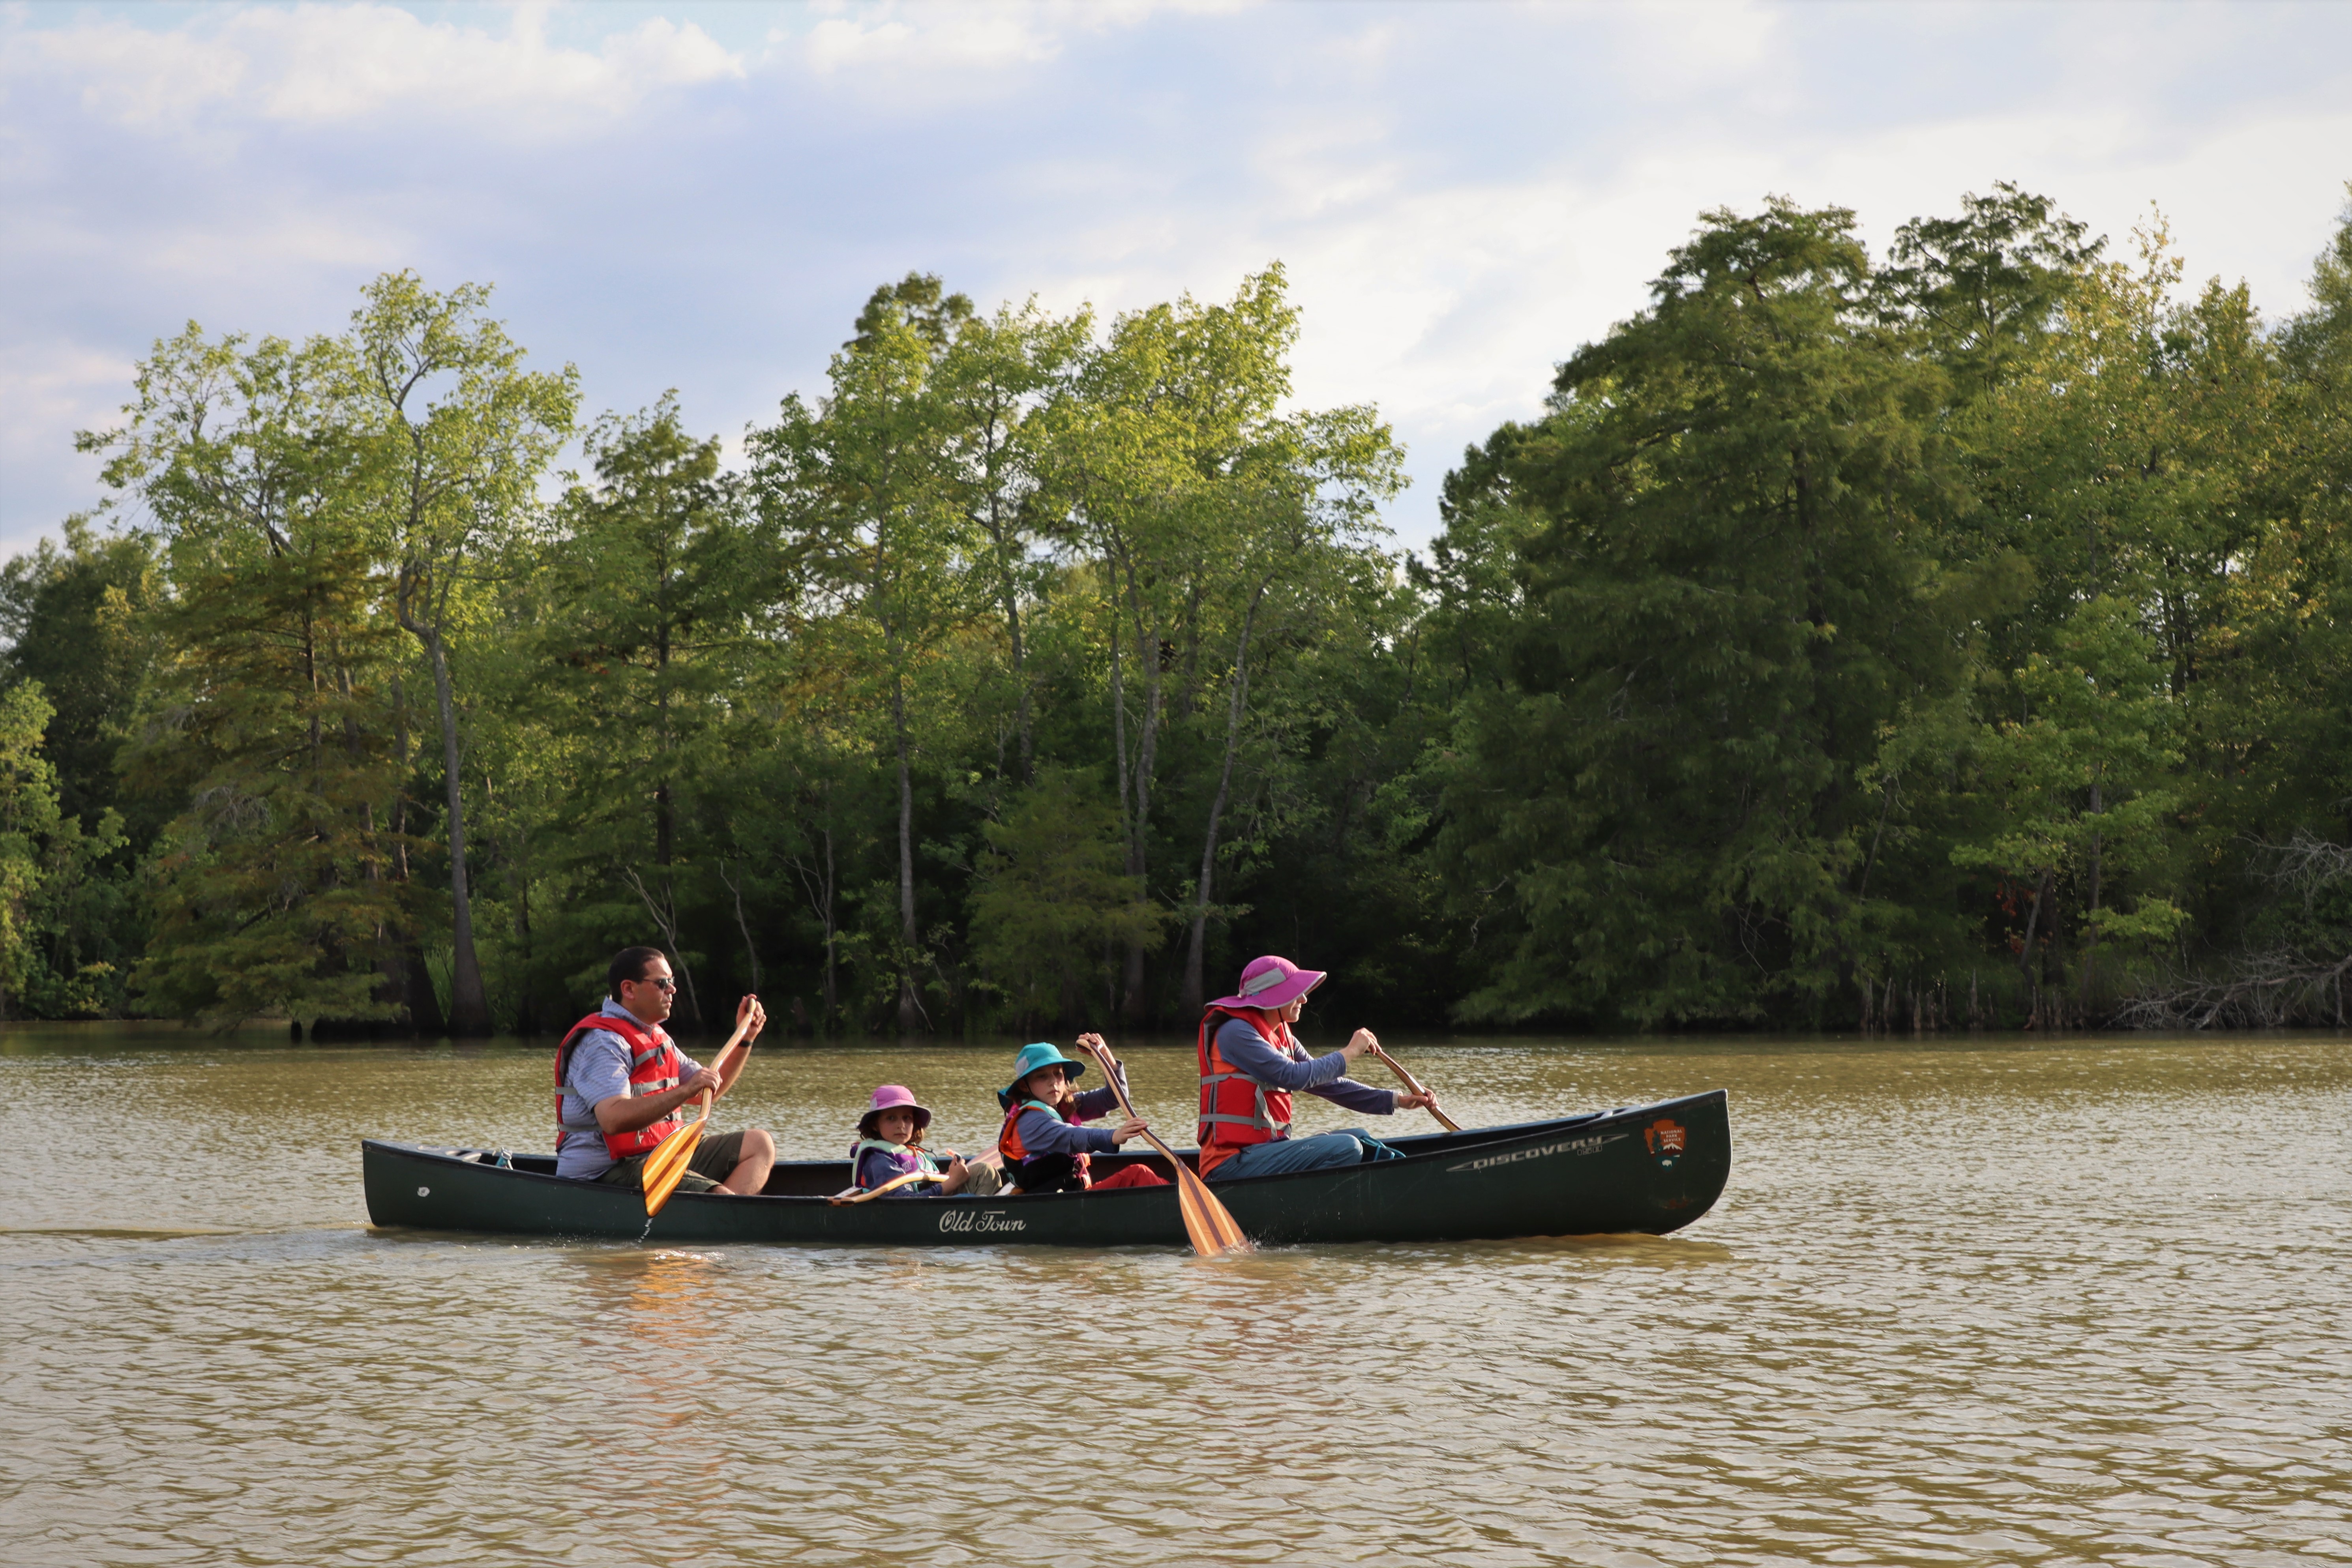 a father, mother, and 2 kids paddling a large green canoe on a wide, forested river.